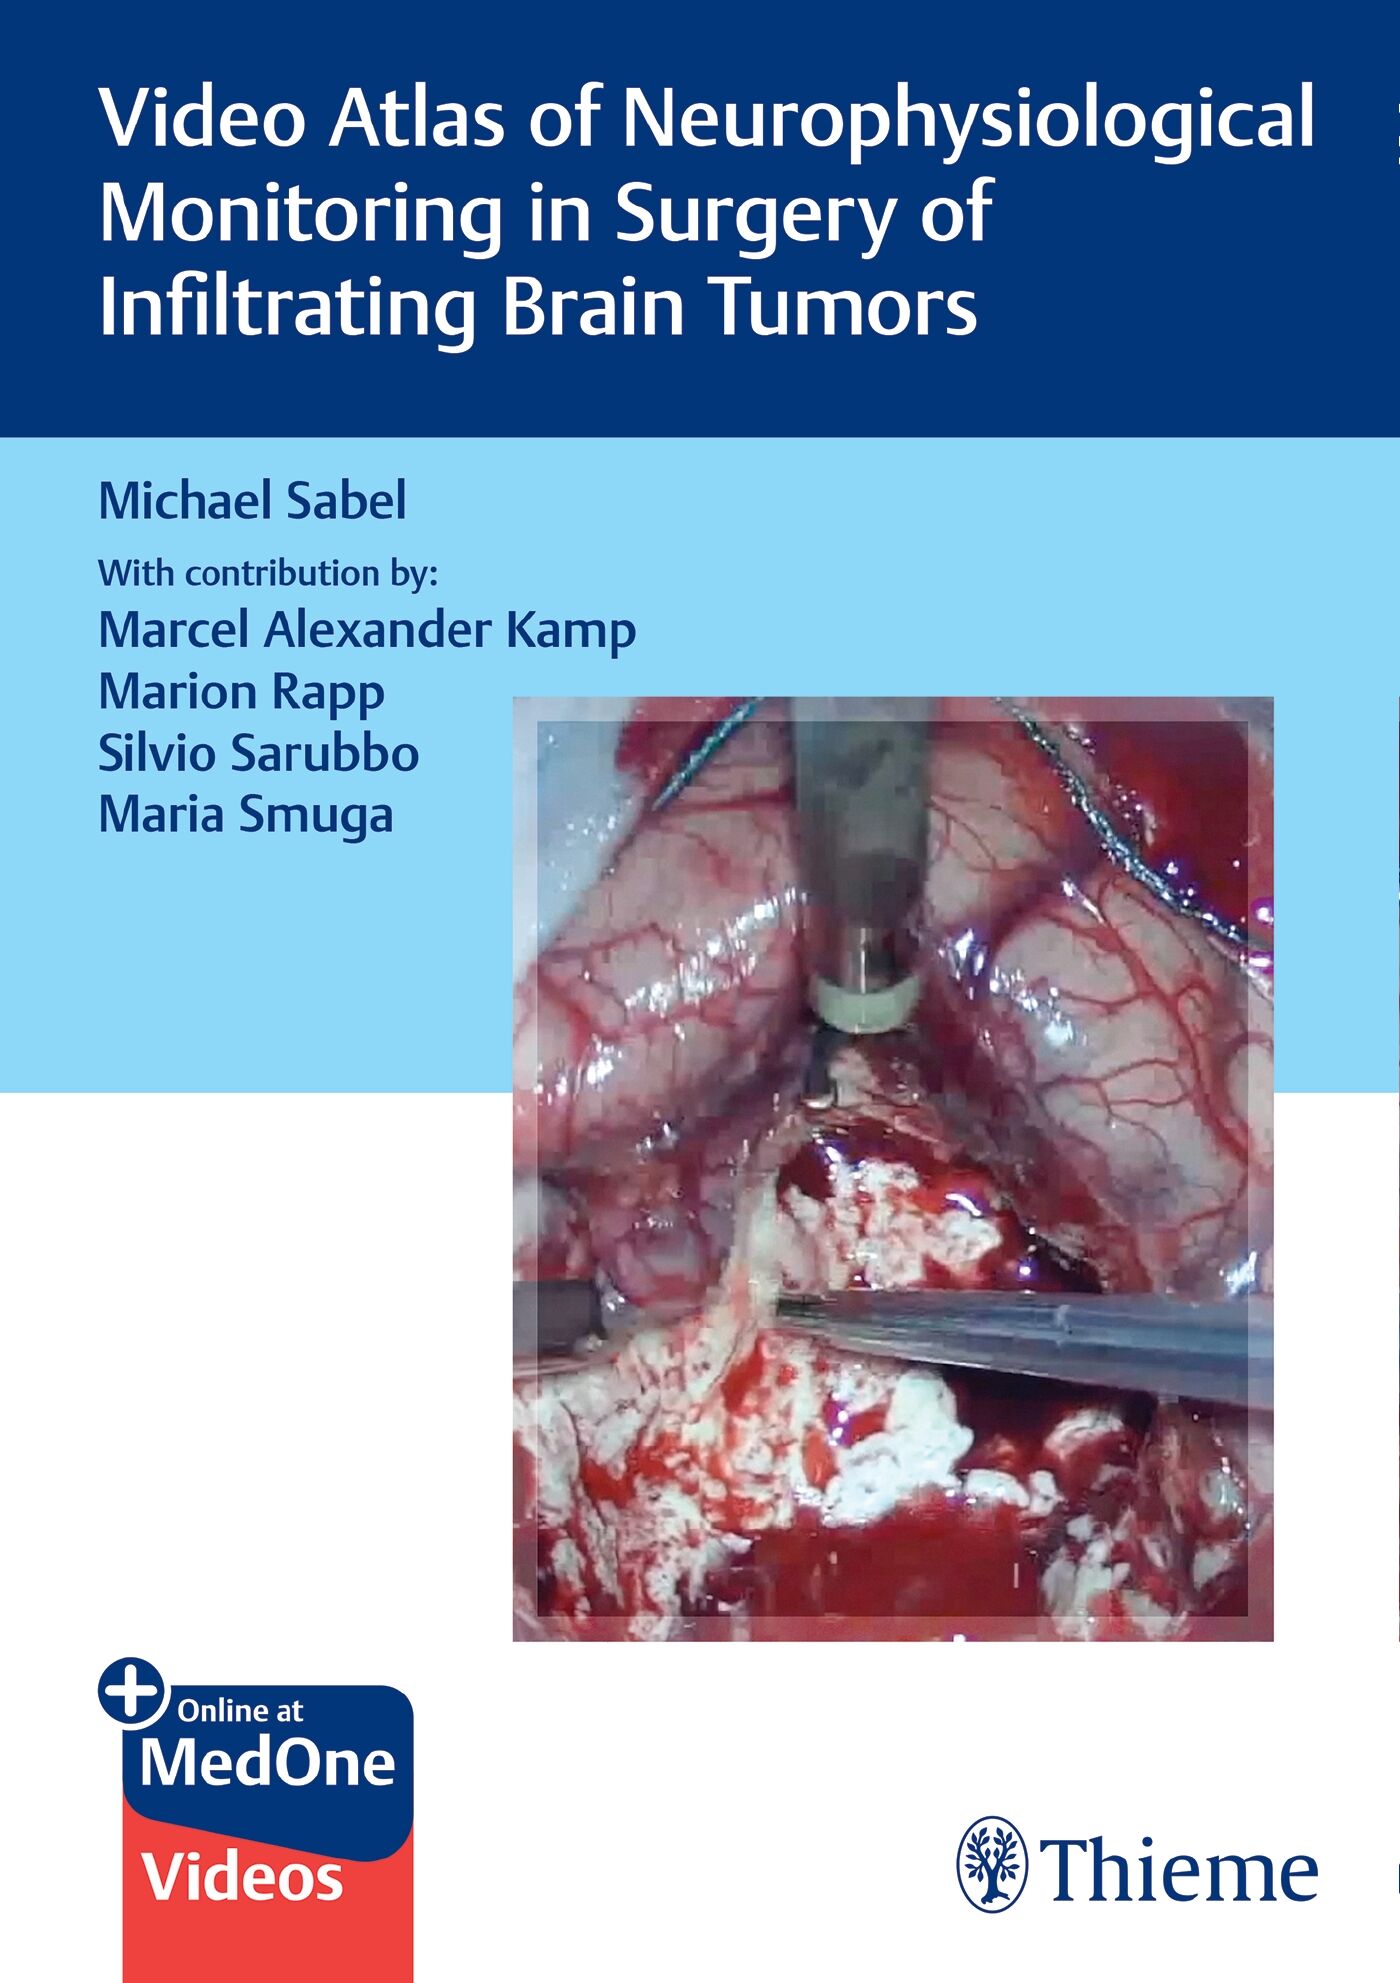 Video Atlas of Neurophysiological Monitoring in Surgery of Infiltrating Brain Tumors, 9783132421462